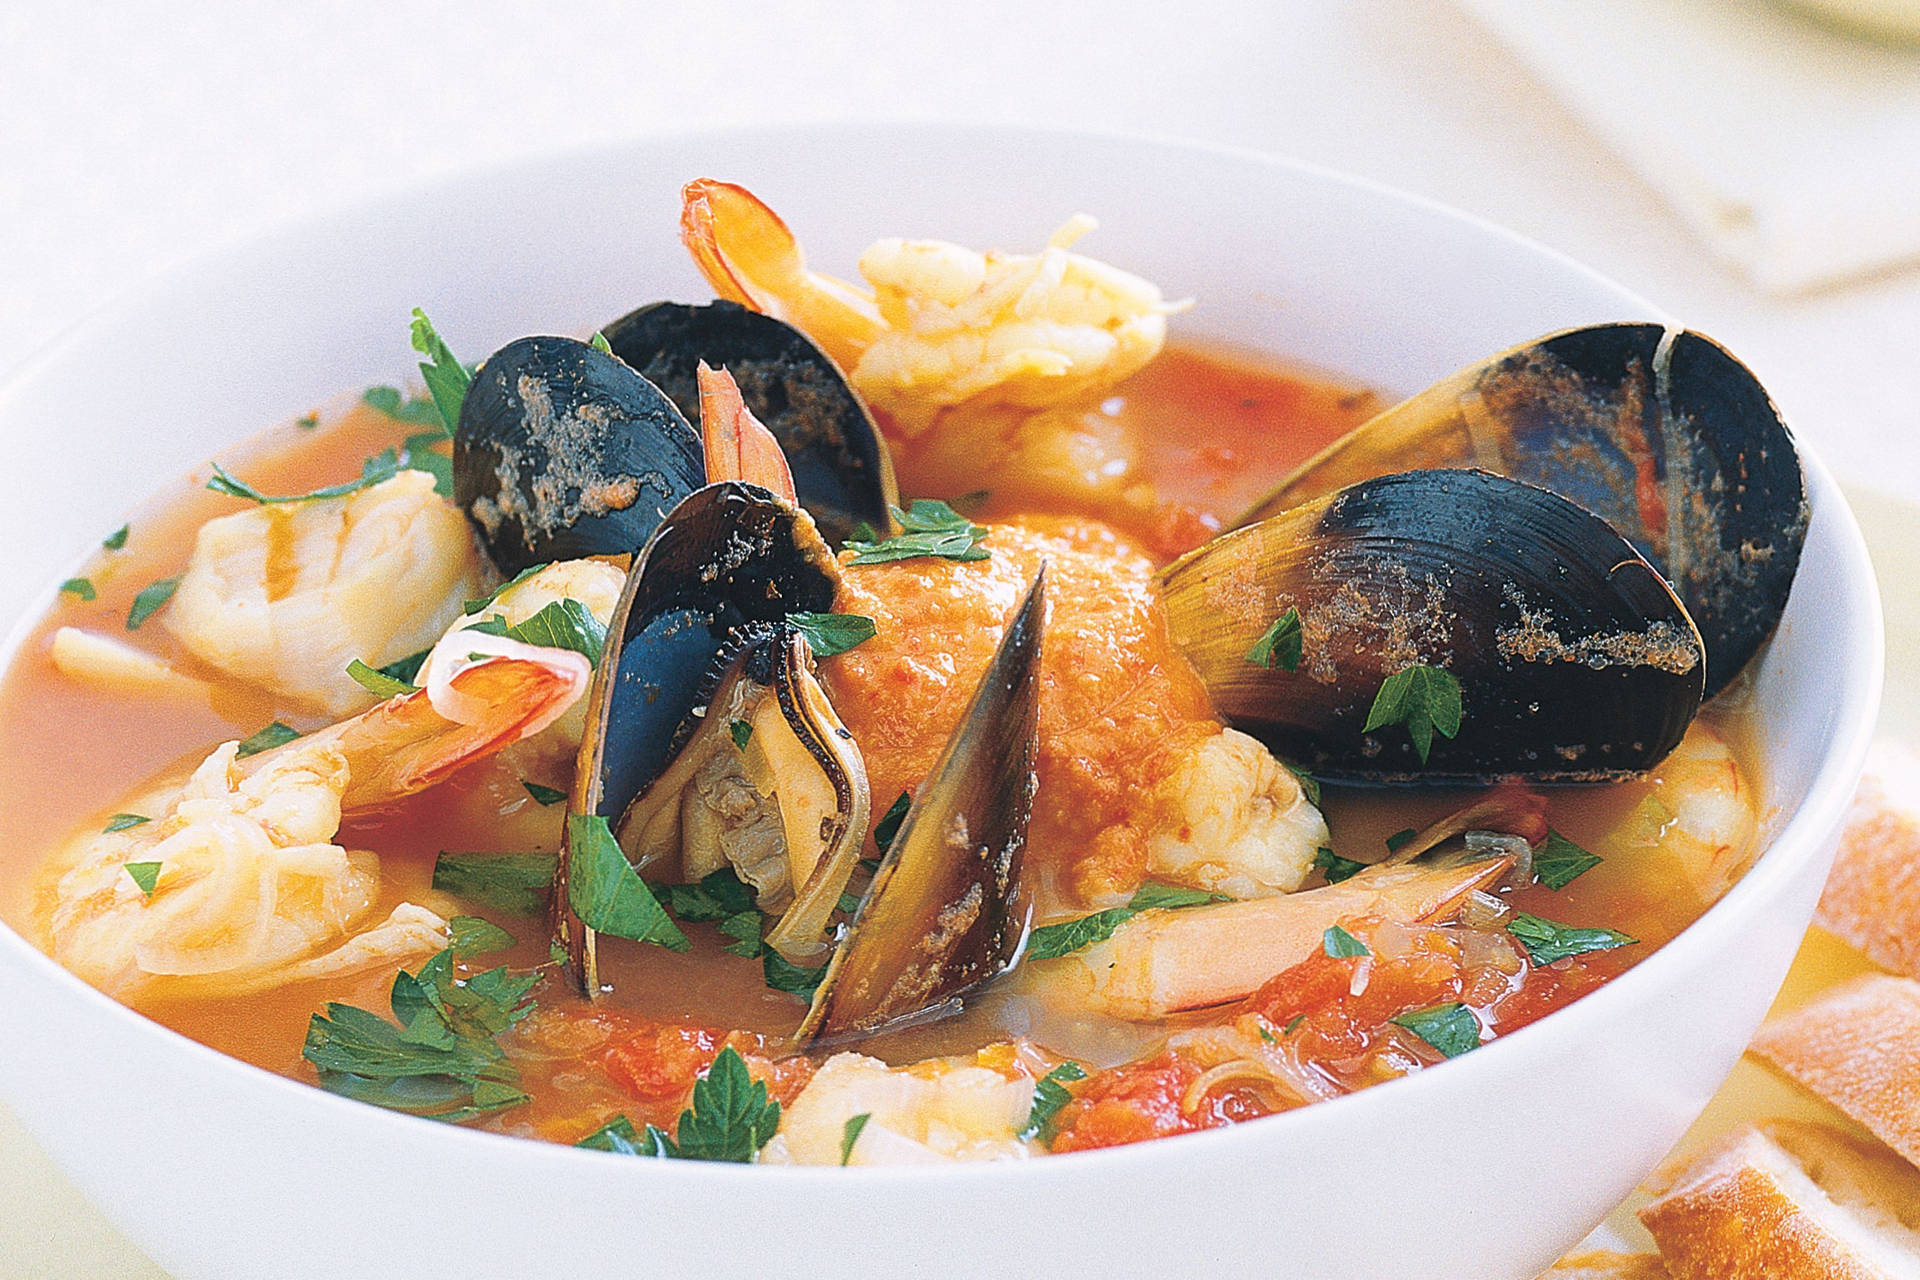 Caption: Authentic French Bouillabaisse Served in a Ceramic Bowl Wallpaper